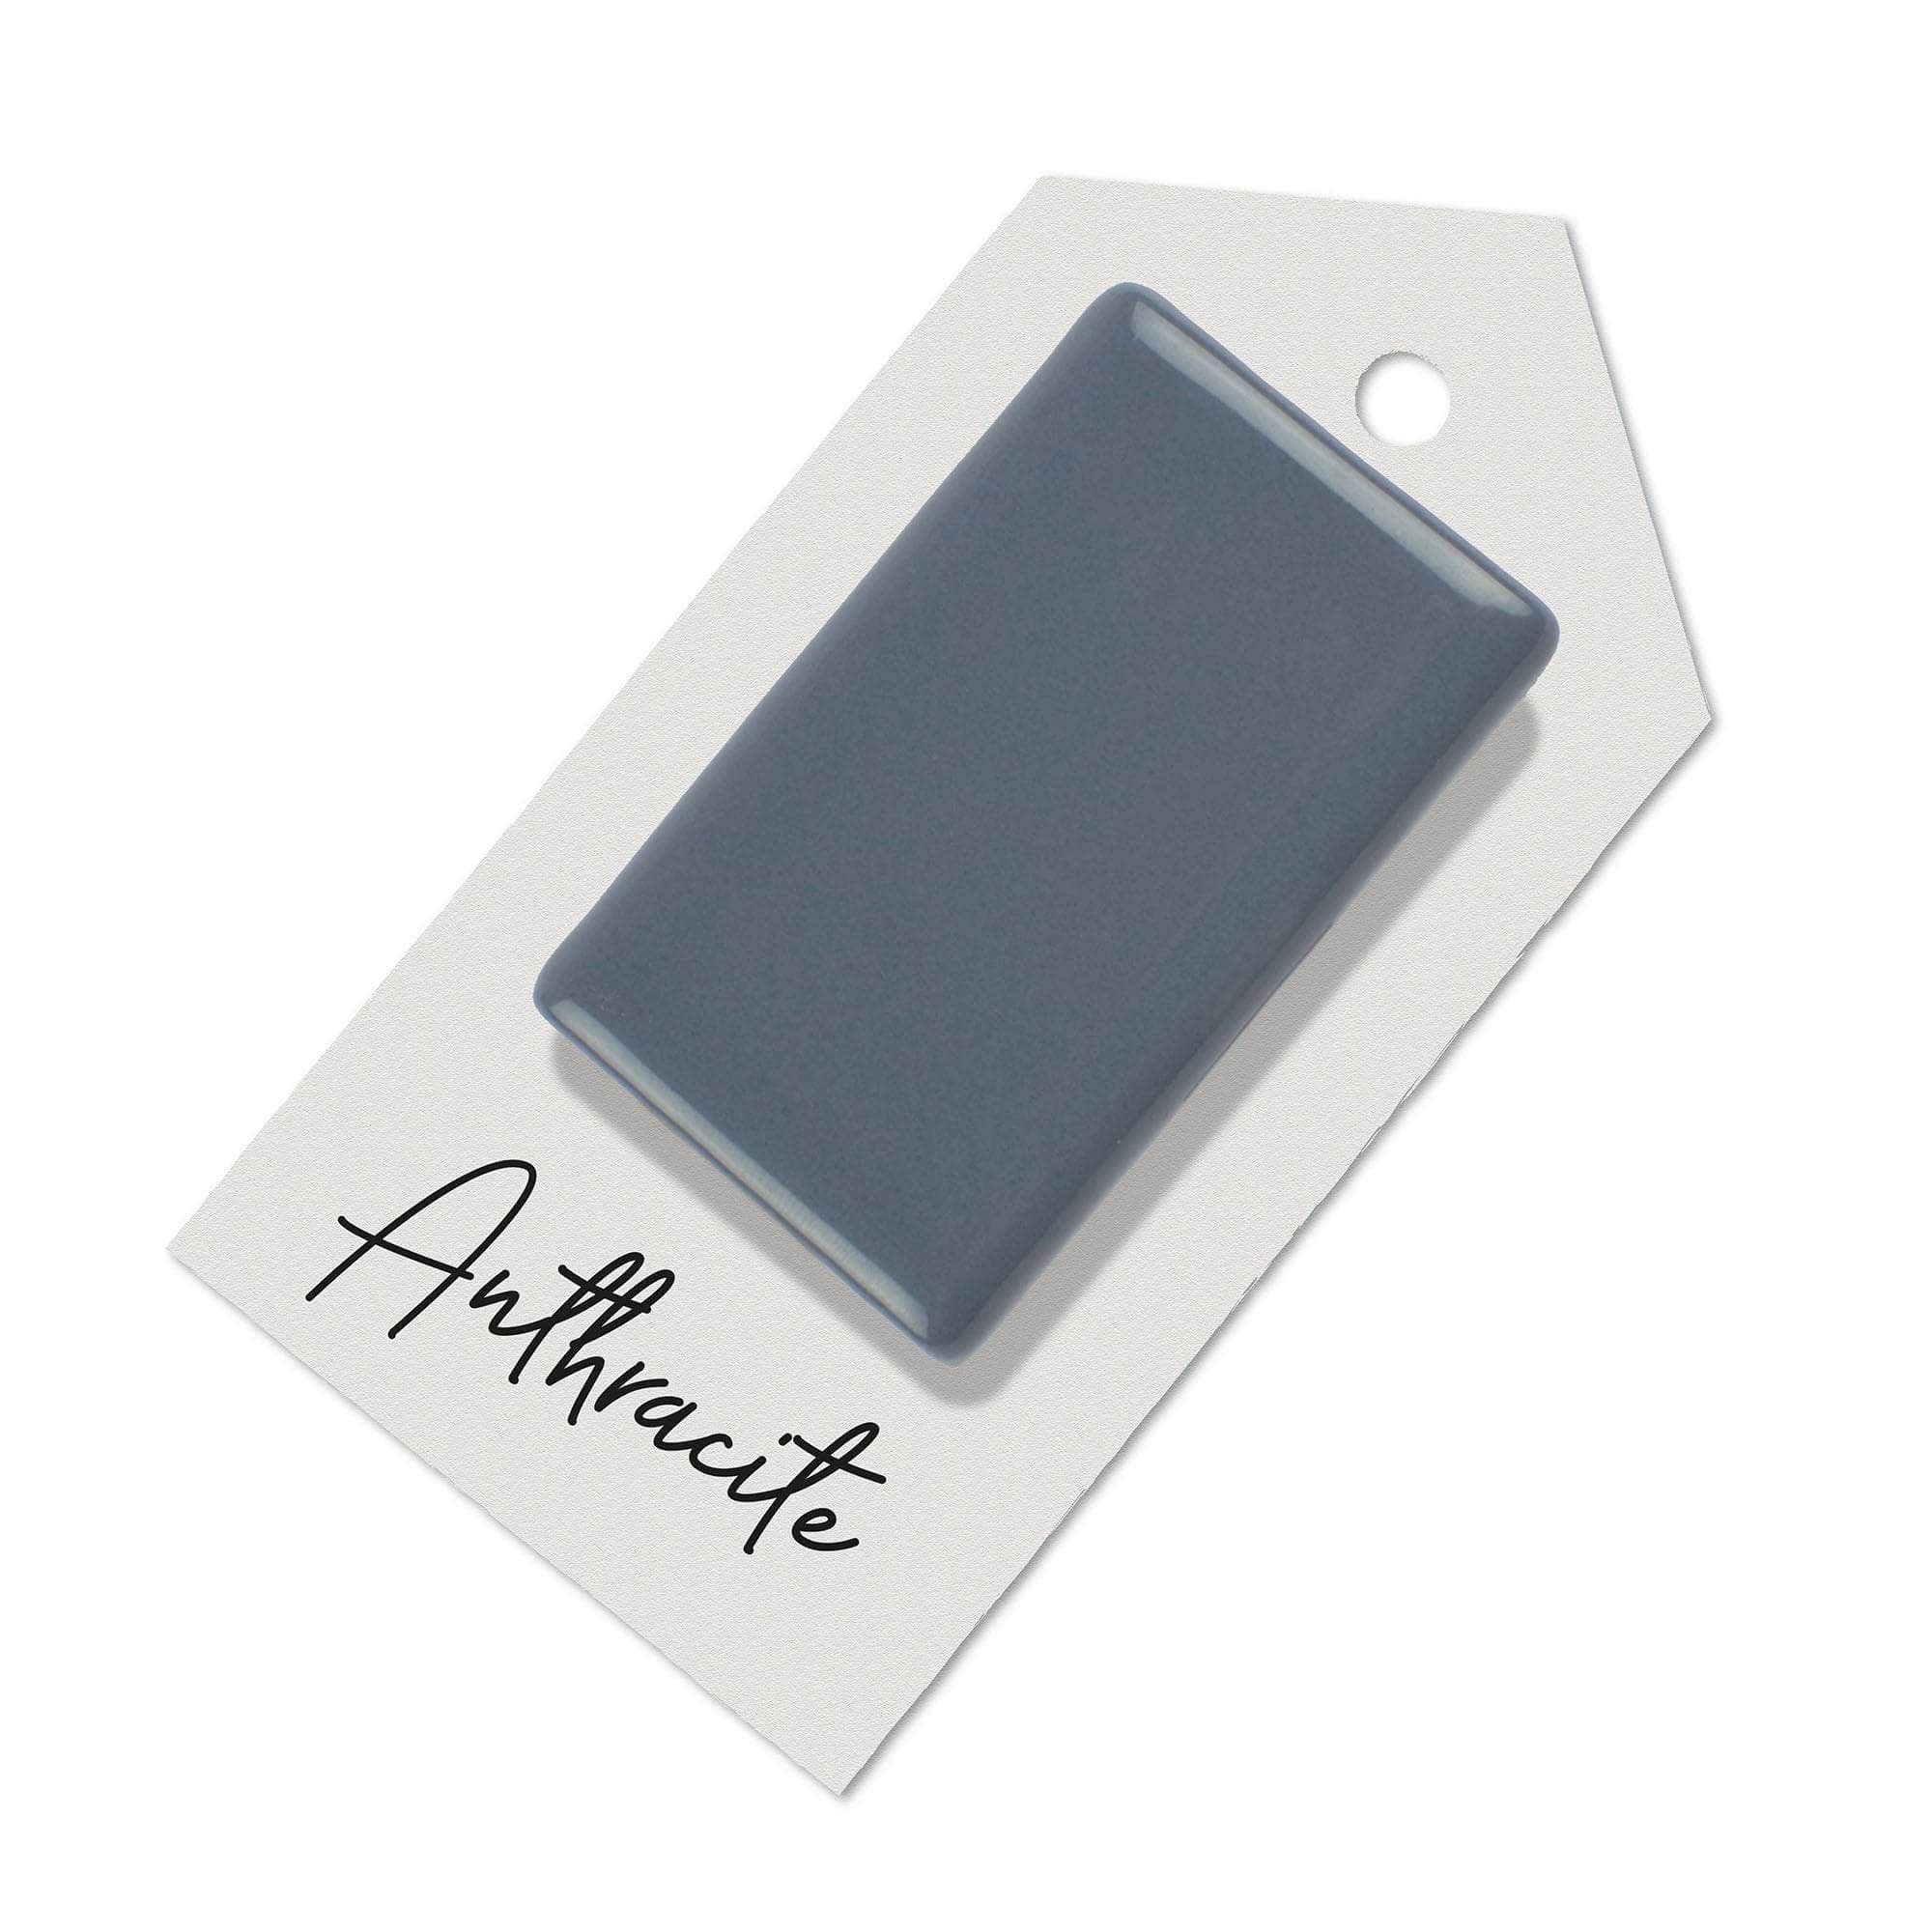 Anthracite sample for Aga range cooker re-enamelling & reconditioned cookers